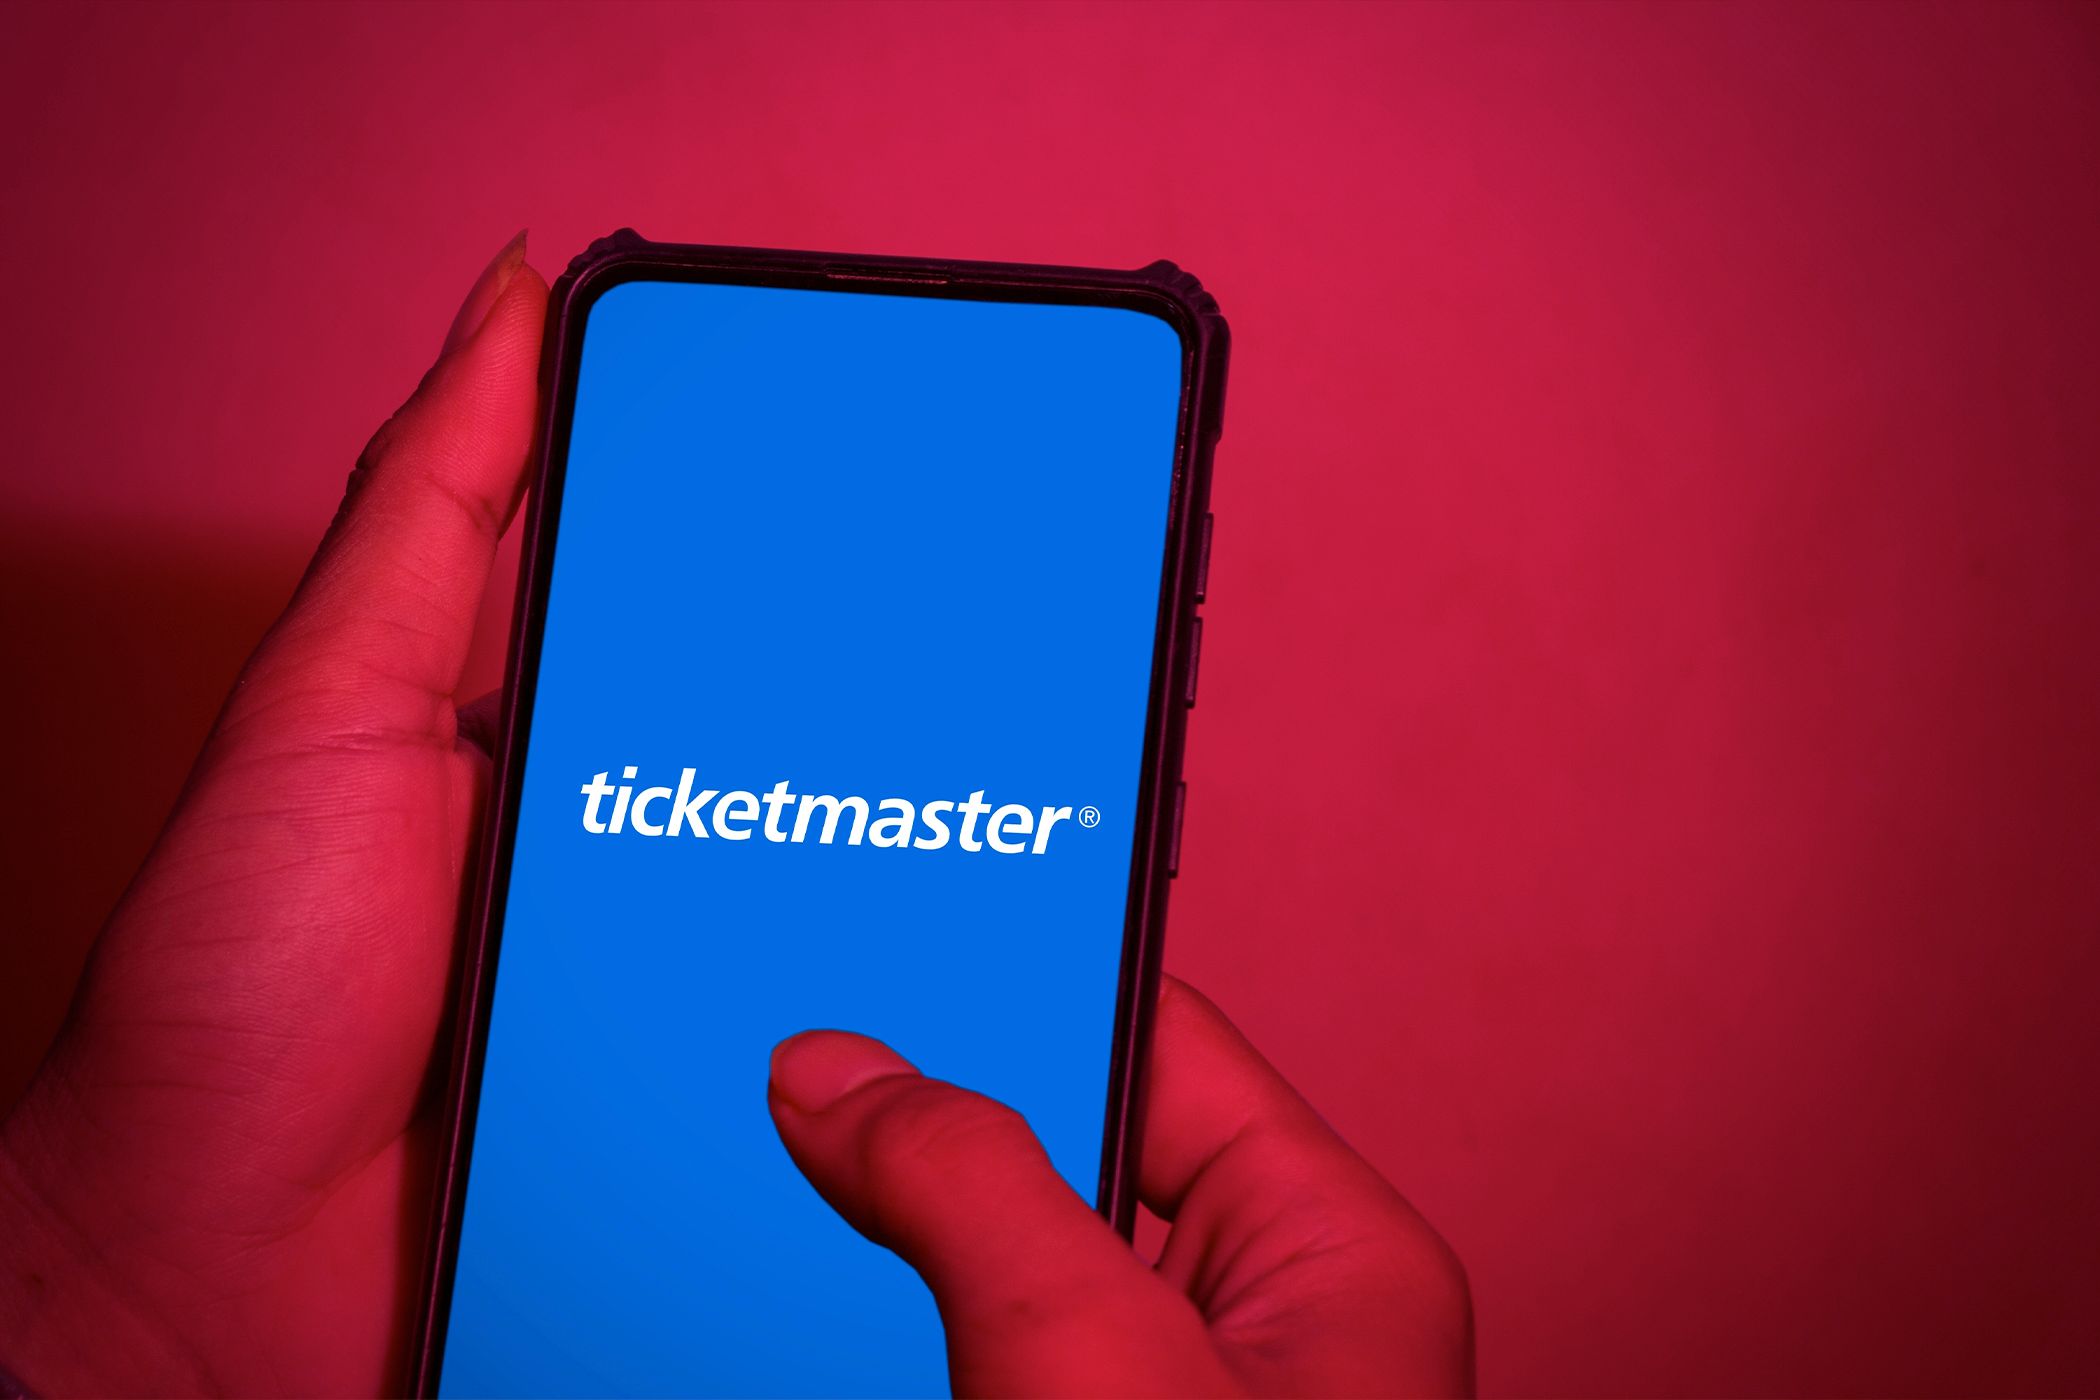 The Ticketmaster logo on a phone with a red background.